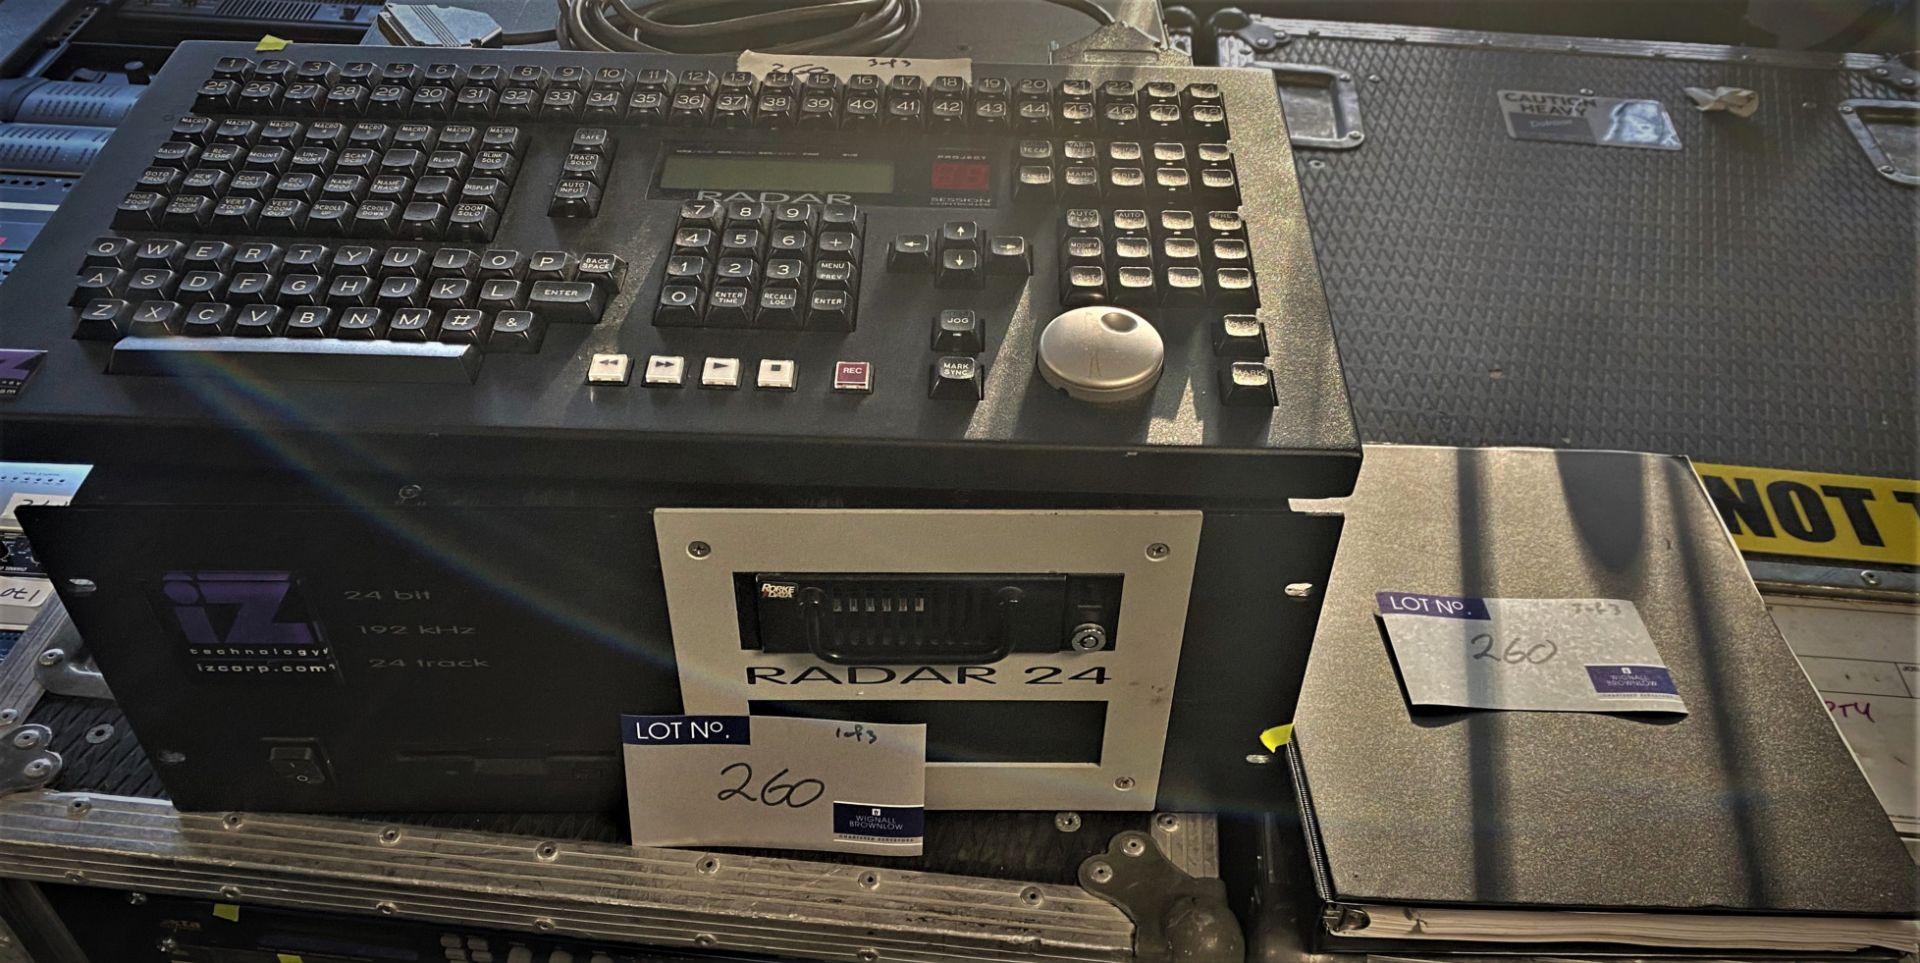 Assorted IZ Technology Equipment comprising: 3 RADAR 24 Session Controller Digital Recorders (only 2 - Image 3 of 15